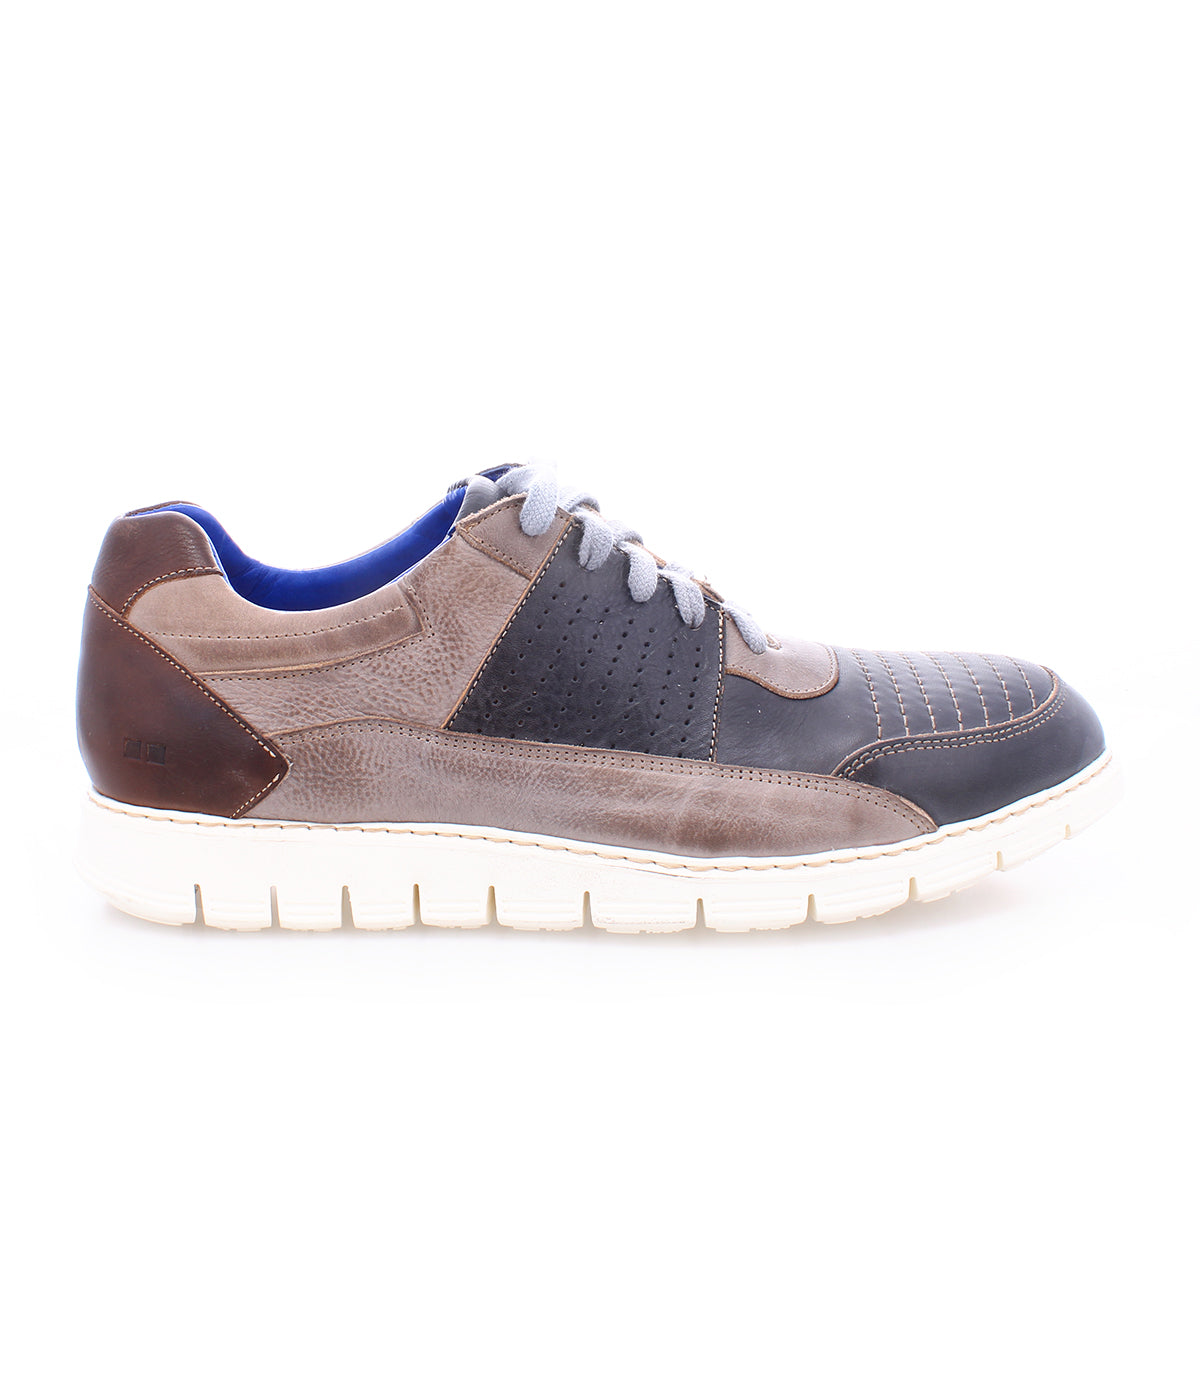 A men's Fairman sneaker by Bed Stu, in brown and blue.